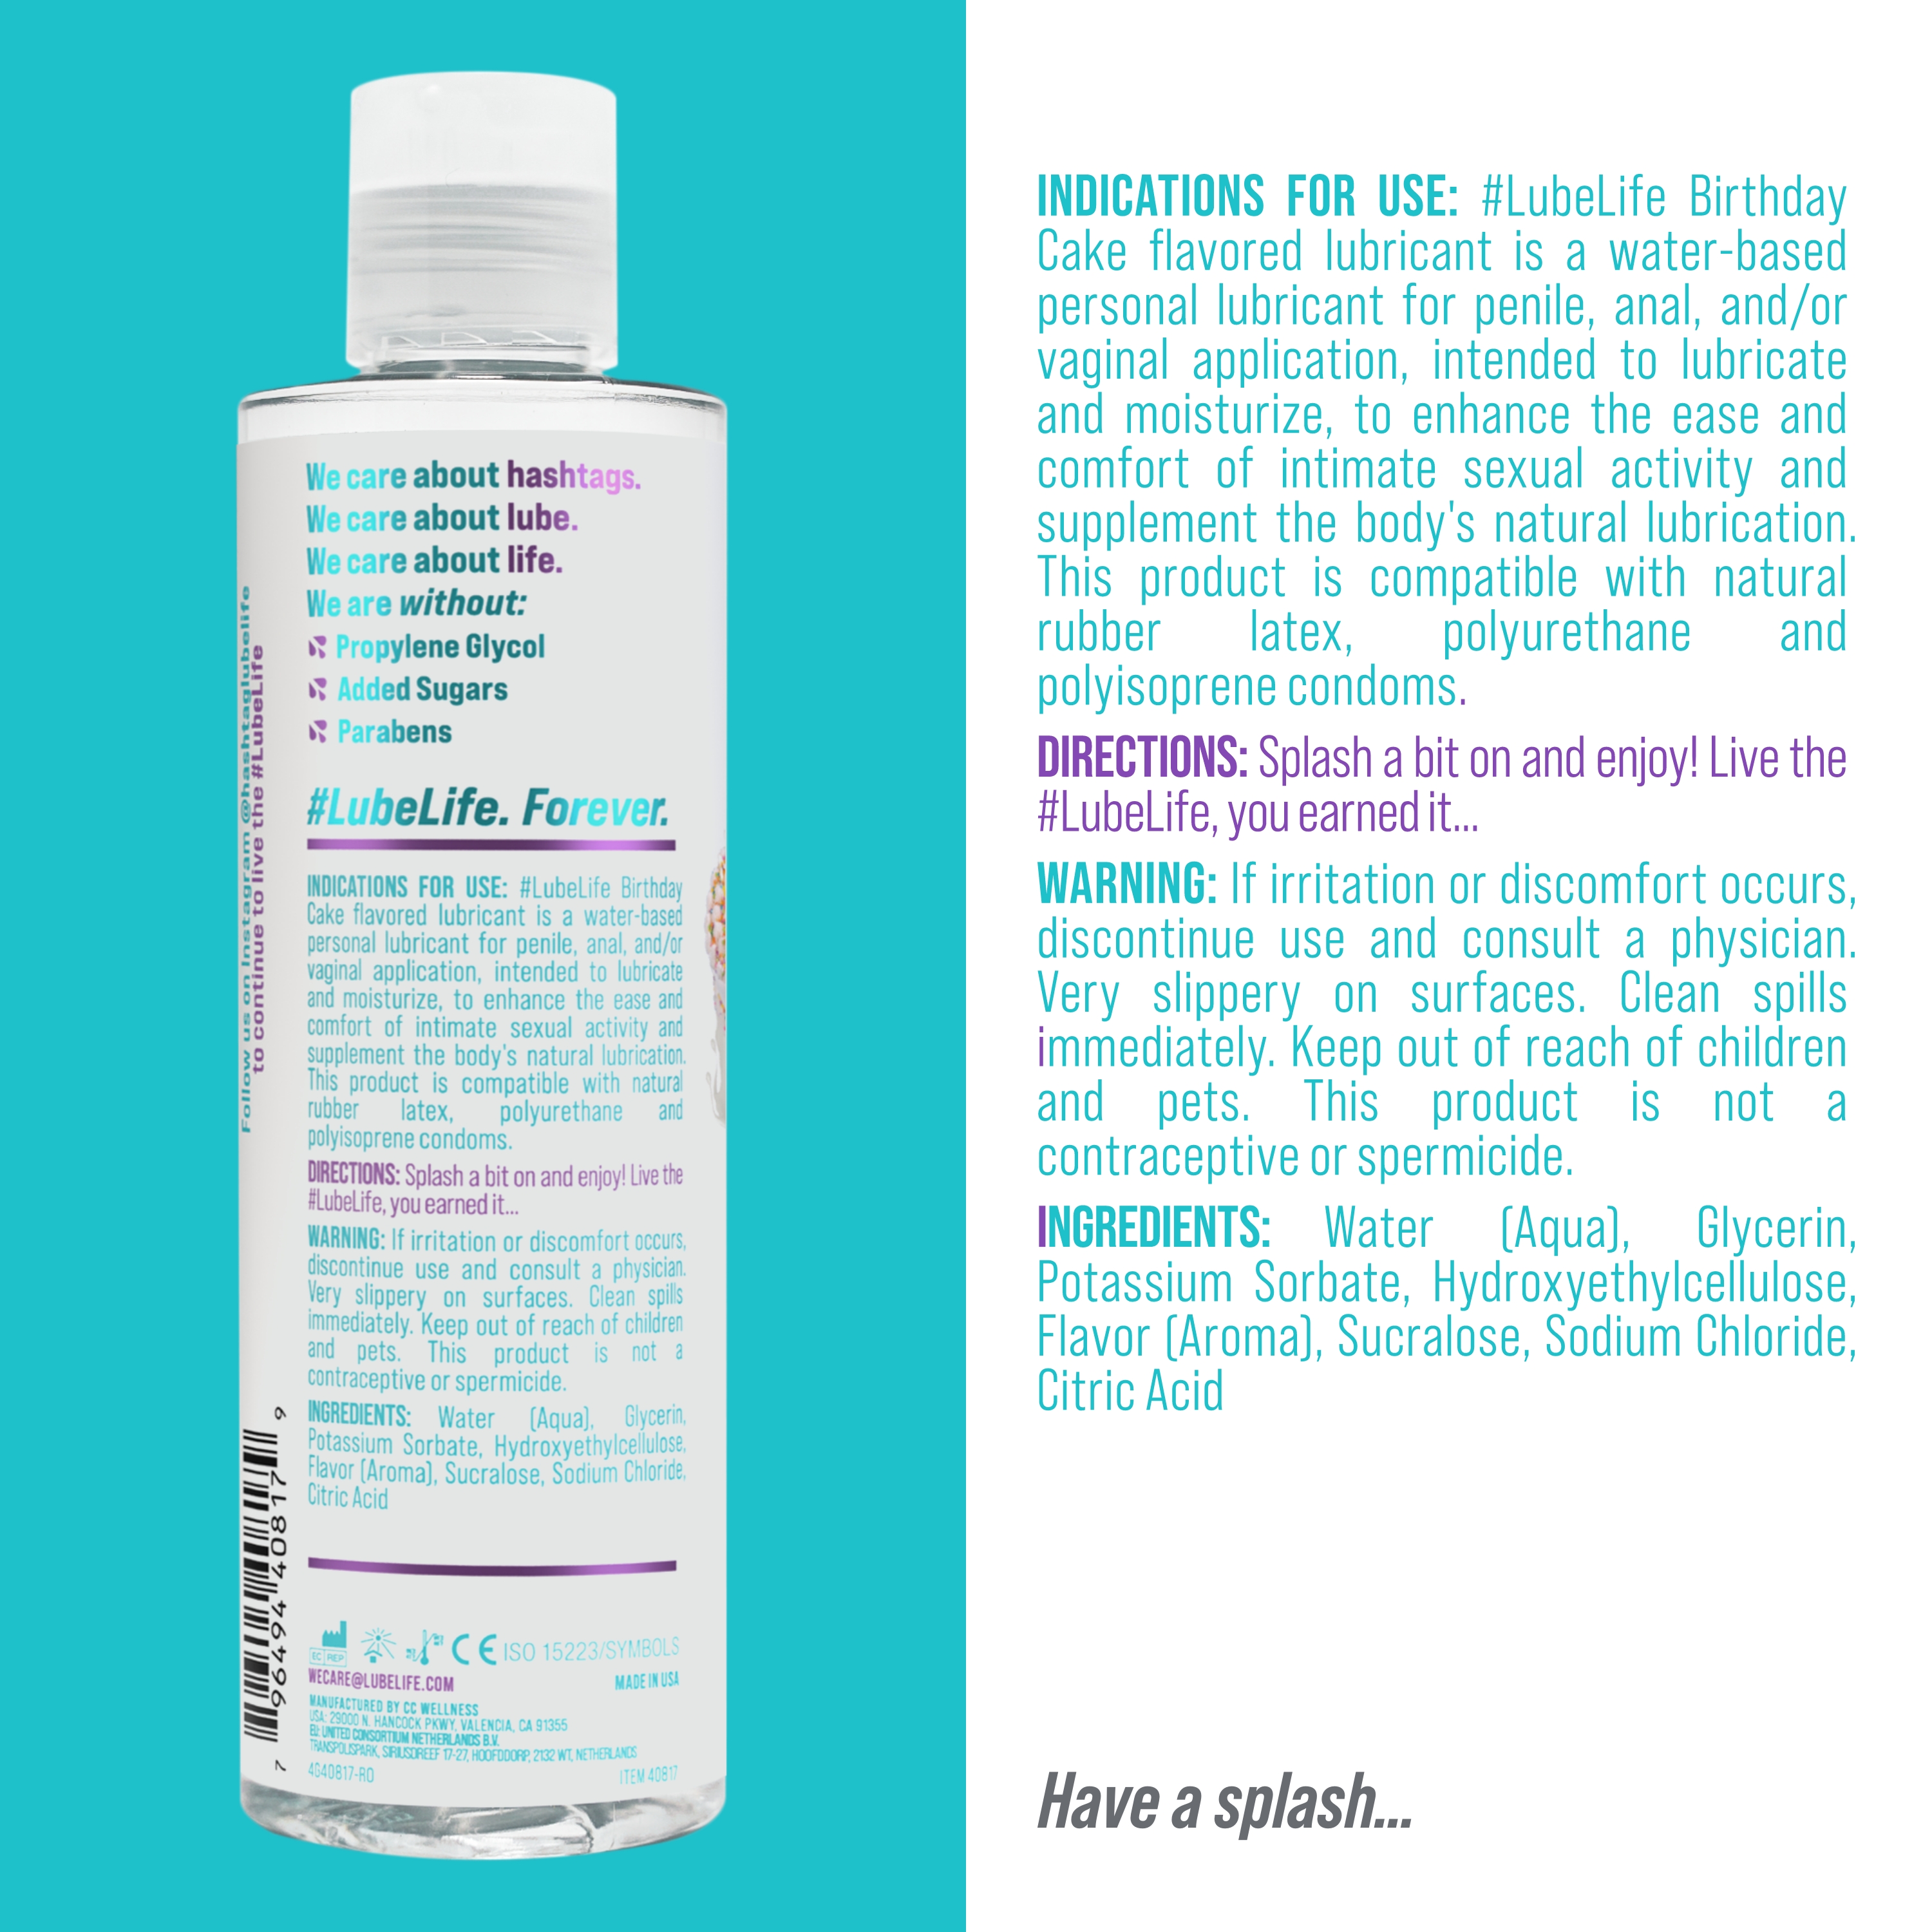 Lube Life Water-Based Birthday Cake Flavored Lubricant, 8 fl oz - image 3 of 5